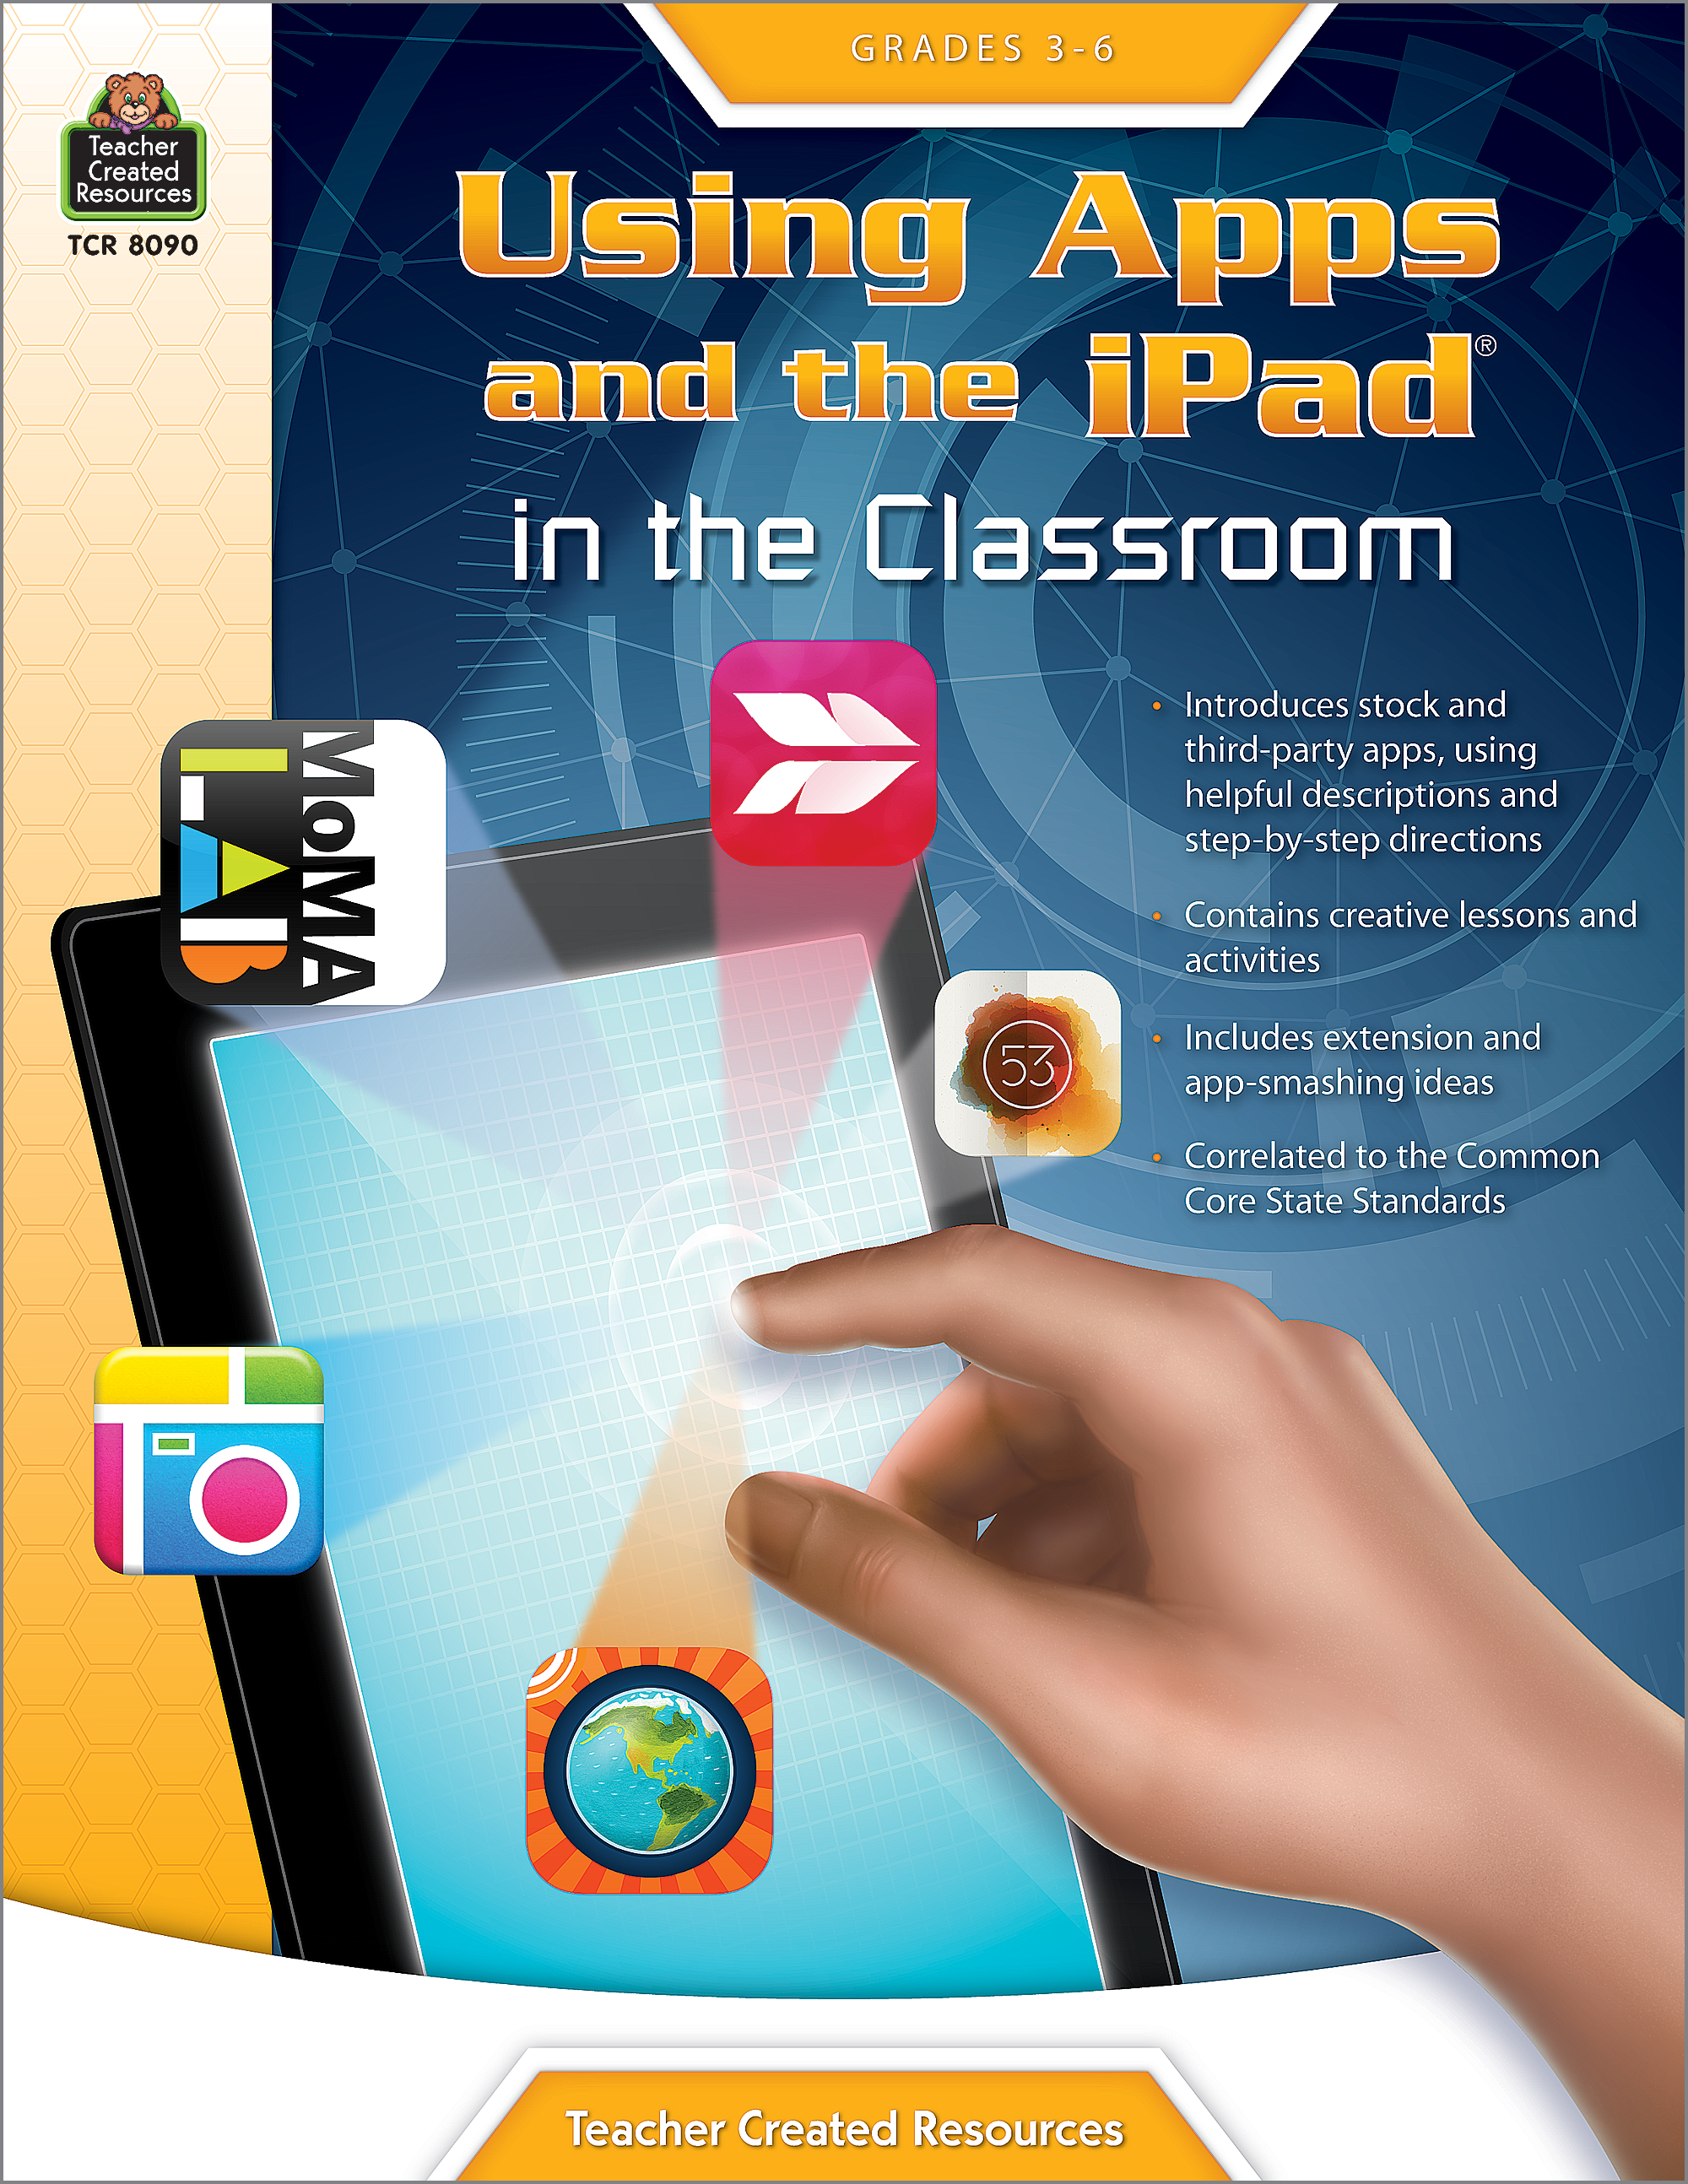 Using Apps and the iPad in the Classroom Grade 3-6 - TCR8090 | Teacher Created Resources2000 x 2588